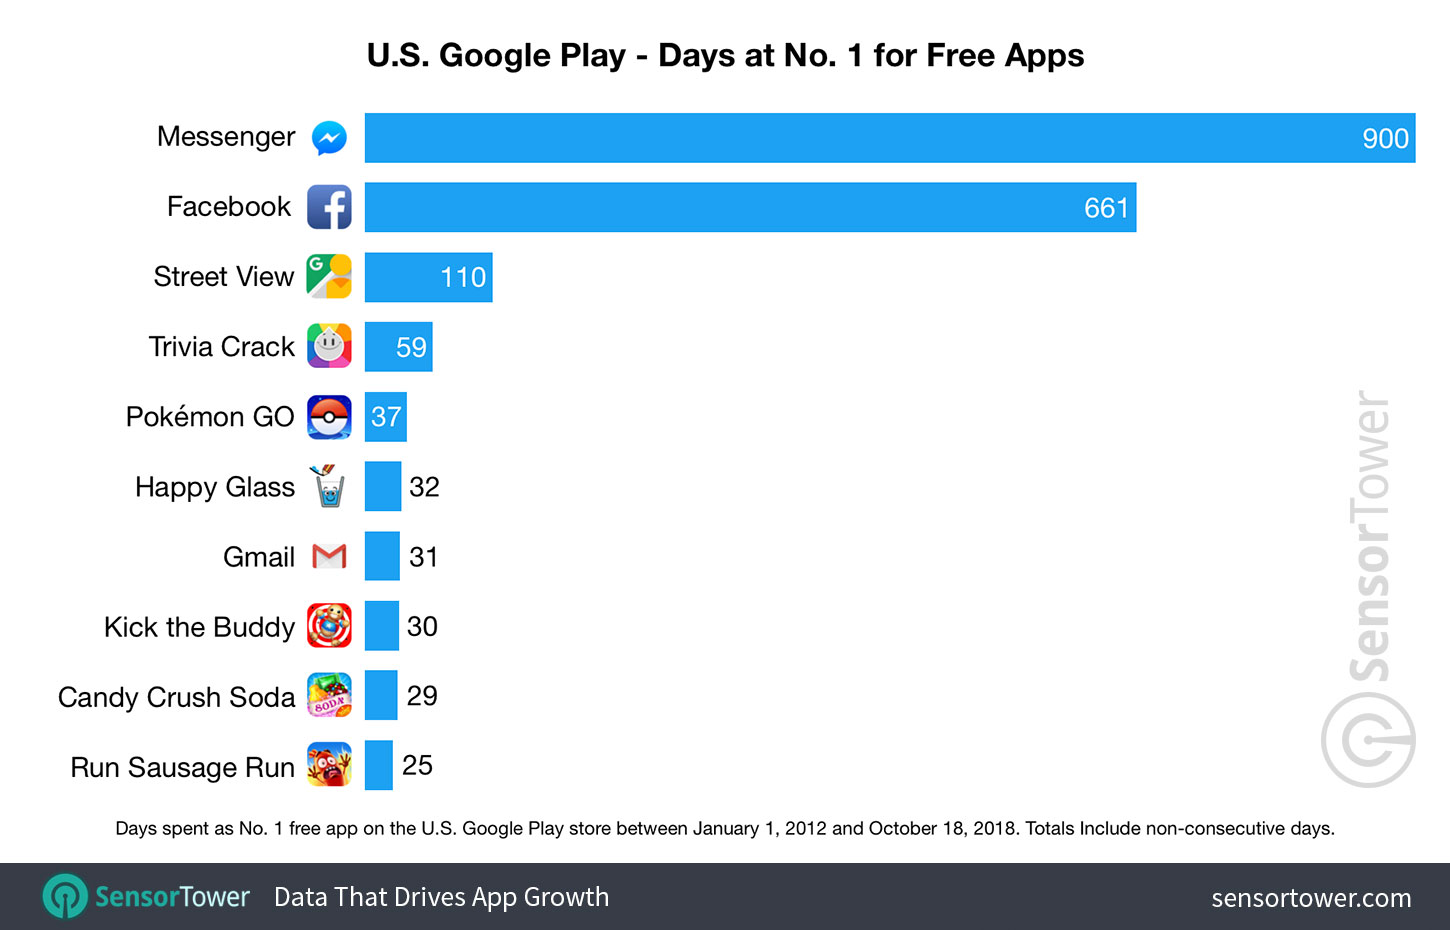 These Apps and Games Have Spent the Most Time at No. 1 on Google Play